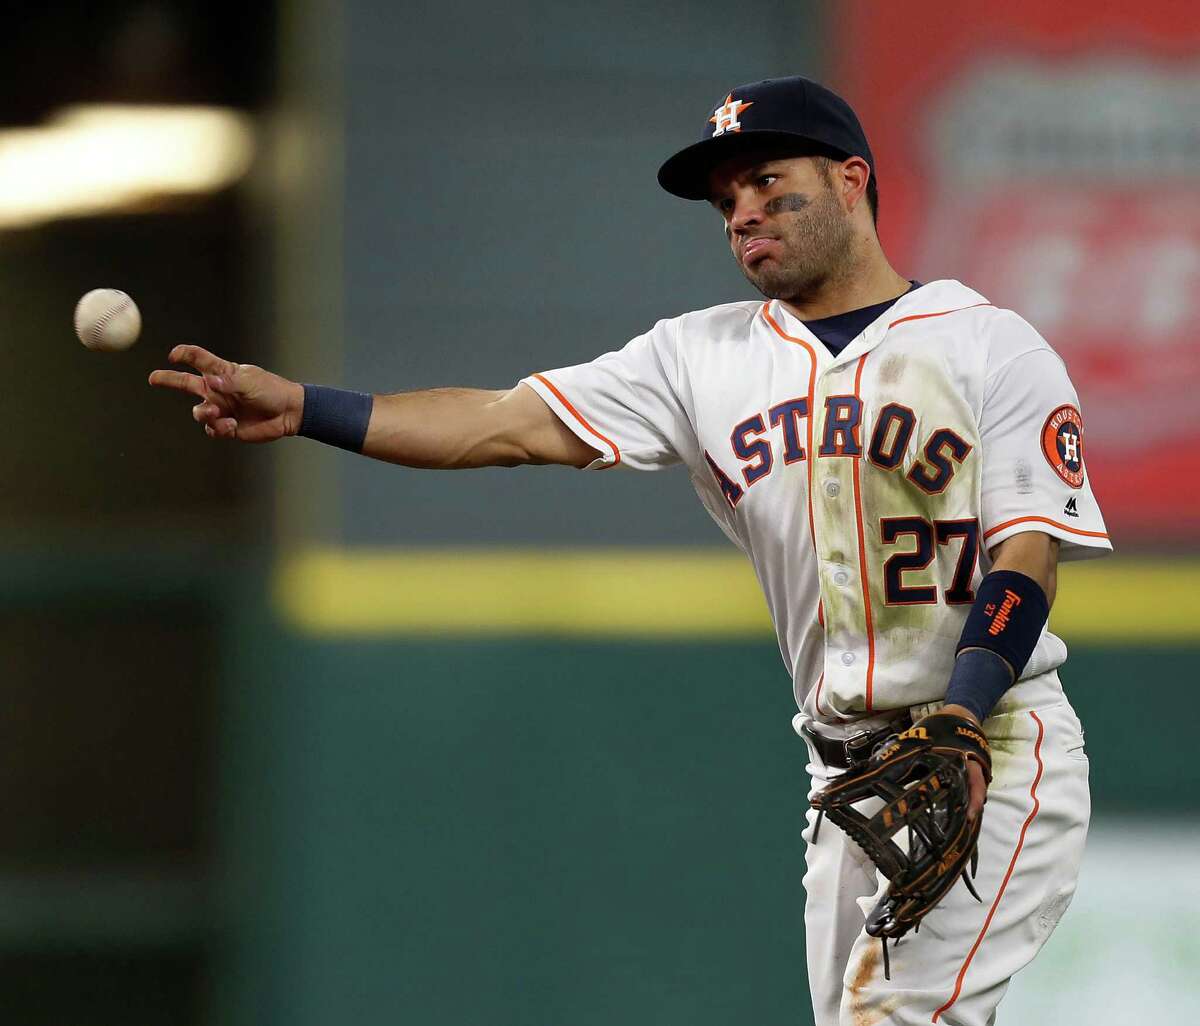 Houston Astros second baseman Jose Altuve (27) throws to first as Texas Rangers Mitch Moreland grounded out during the third inning of an MLB game at Minute Maid Park, Monday, Sept. 12, 2016 in Houston.